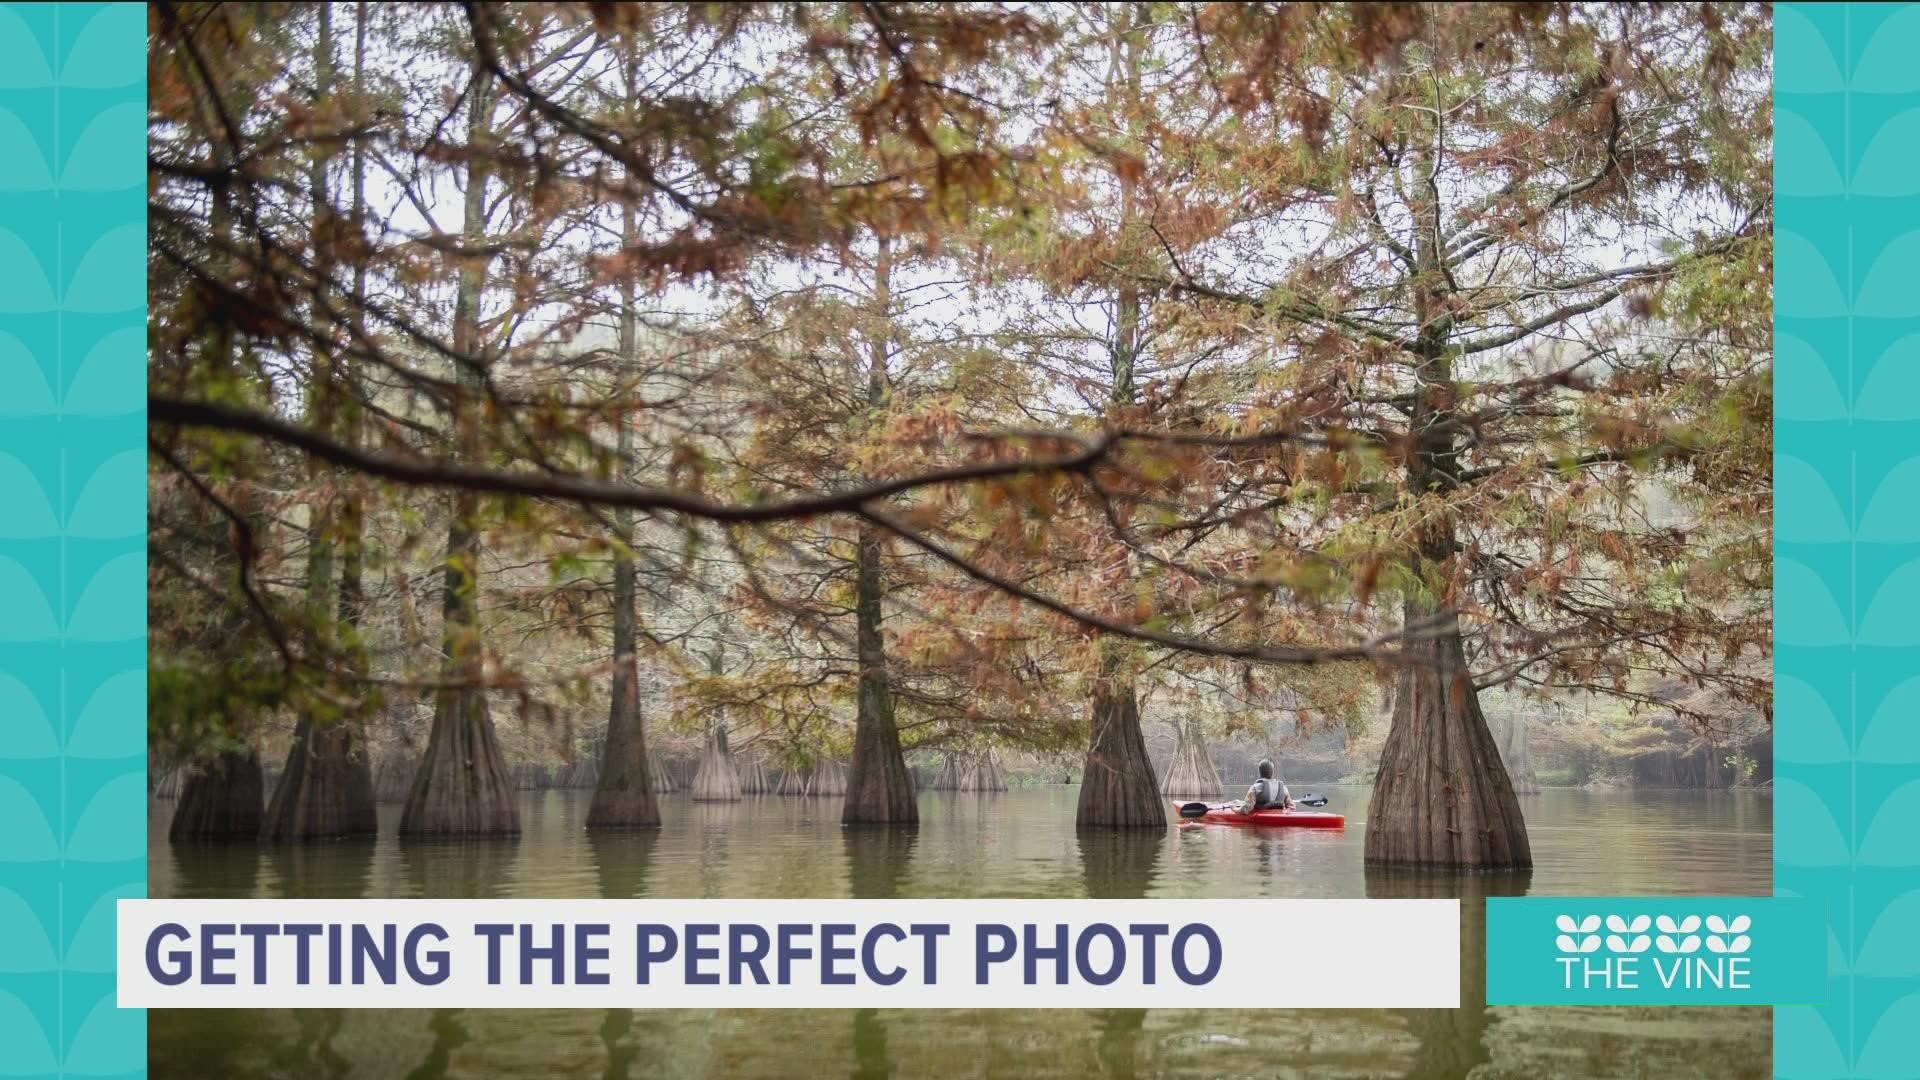 Arkansas Department of Parks, Heritage and Tourism photographer Will Newton joins us again to give 4 tips about how to get the perfect outdoor shots.